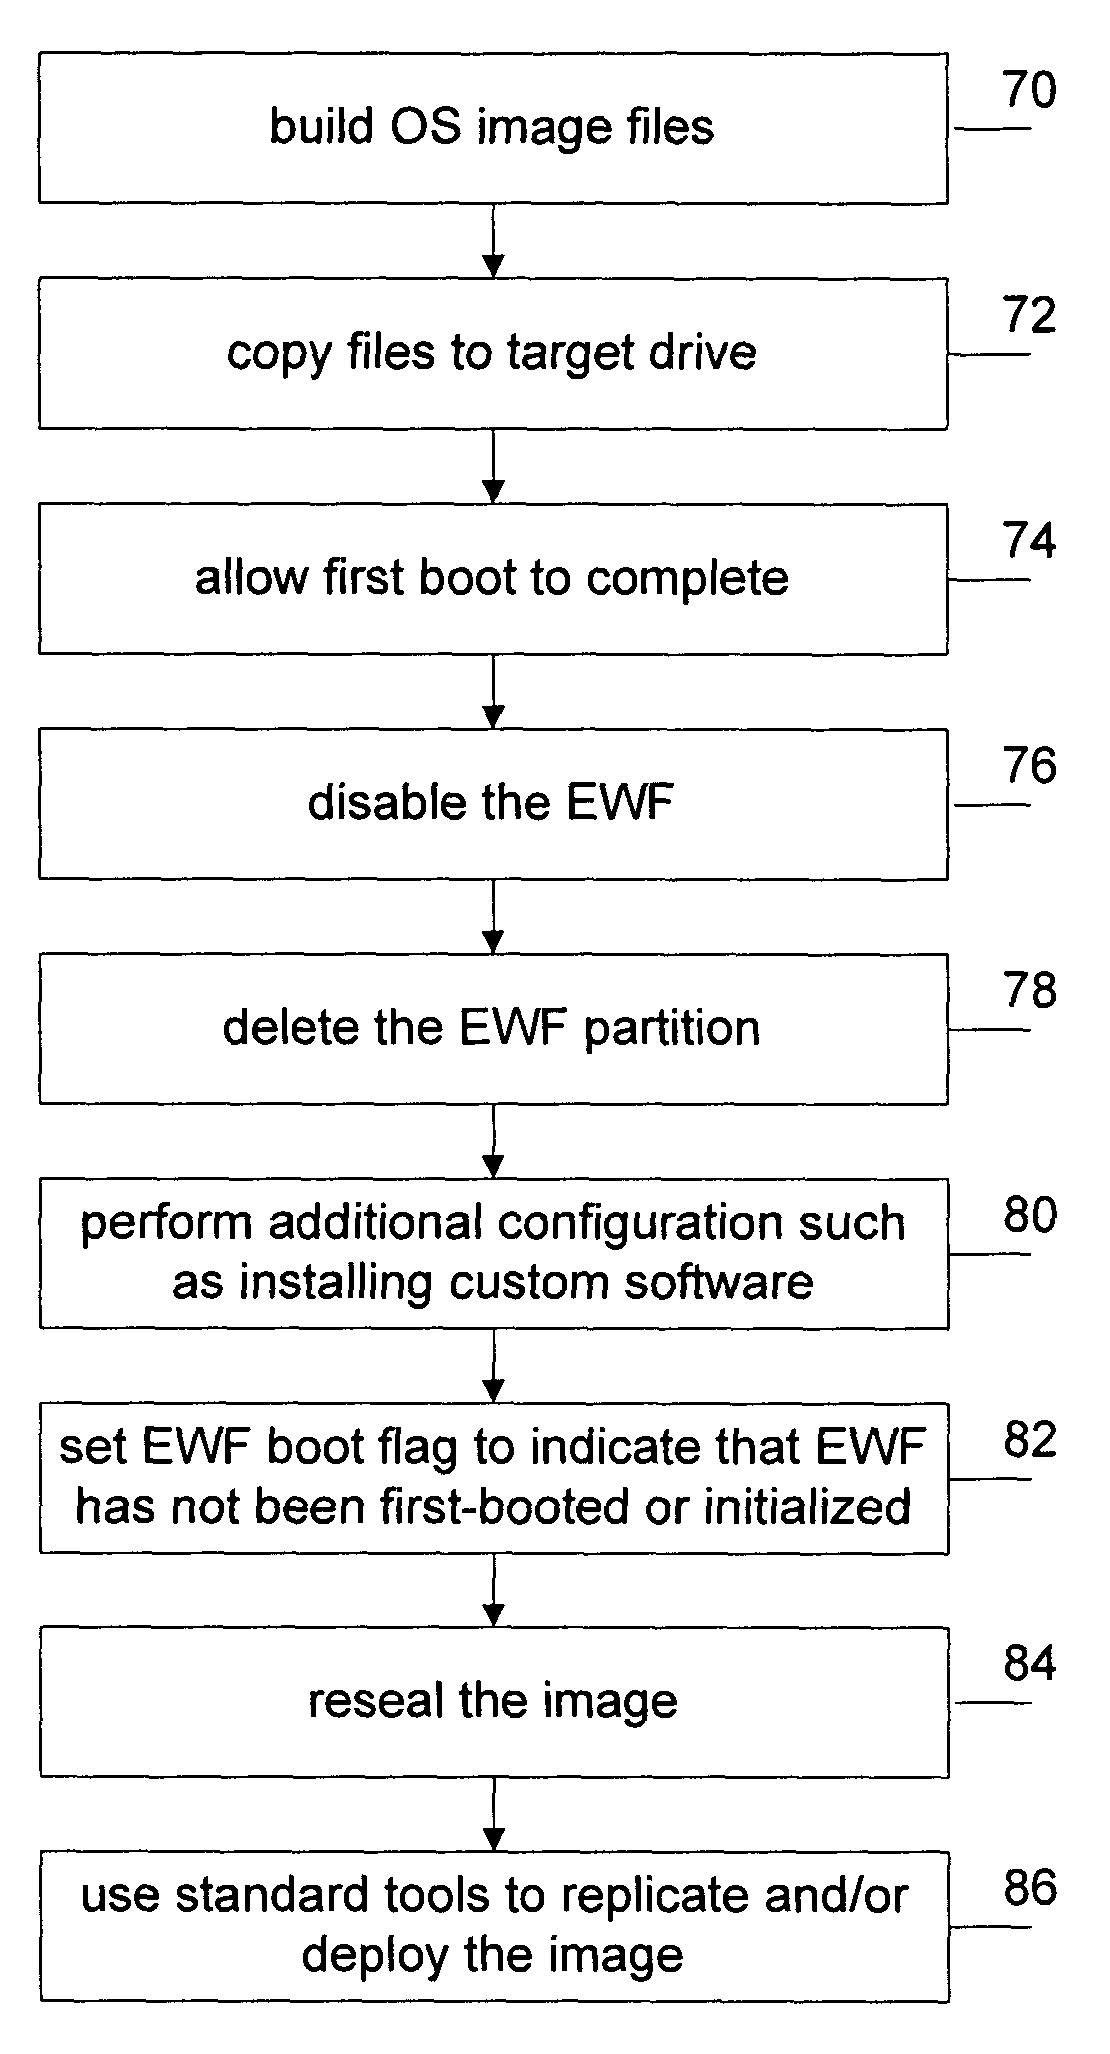 Efficient replication of embedded operating system with a write filter and overlay partition